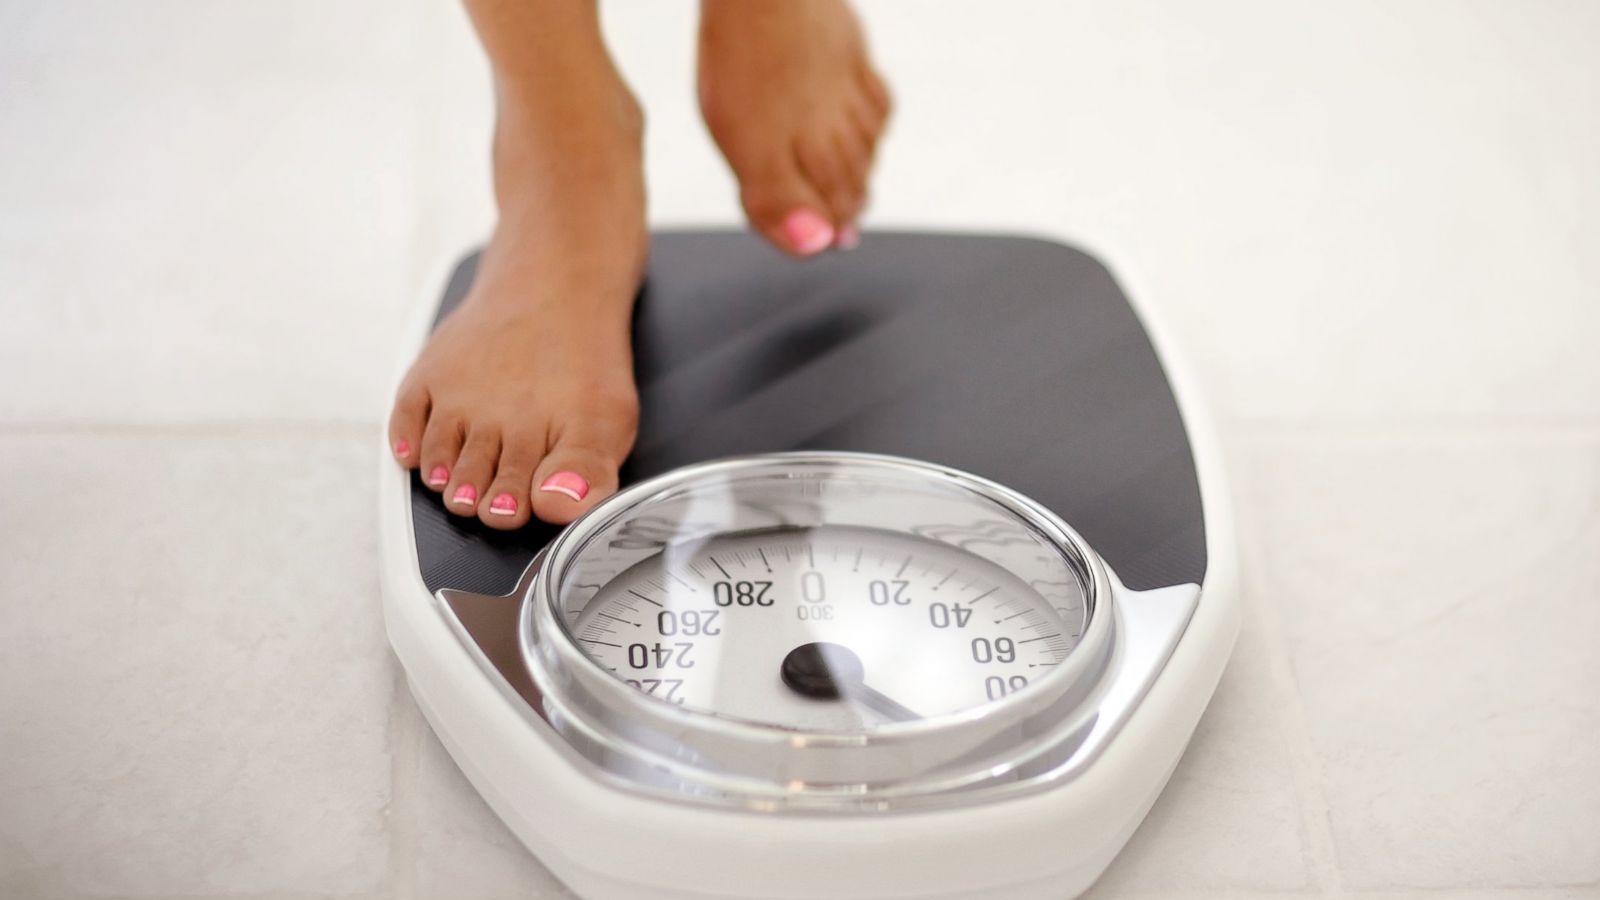 PHOTO: A woman stands on a bathroom scale in this undated stock photo.